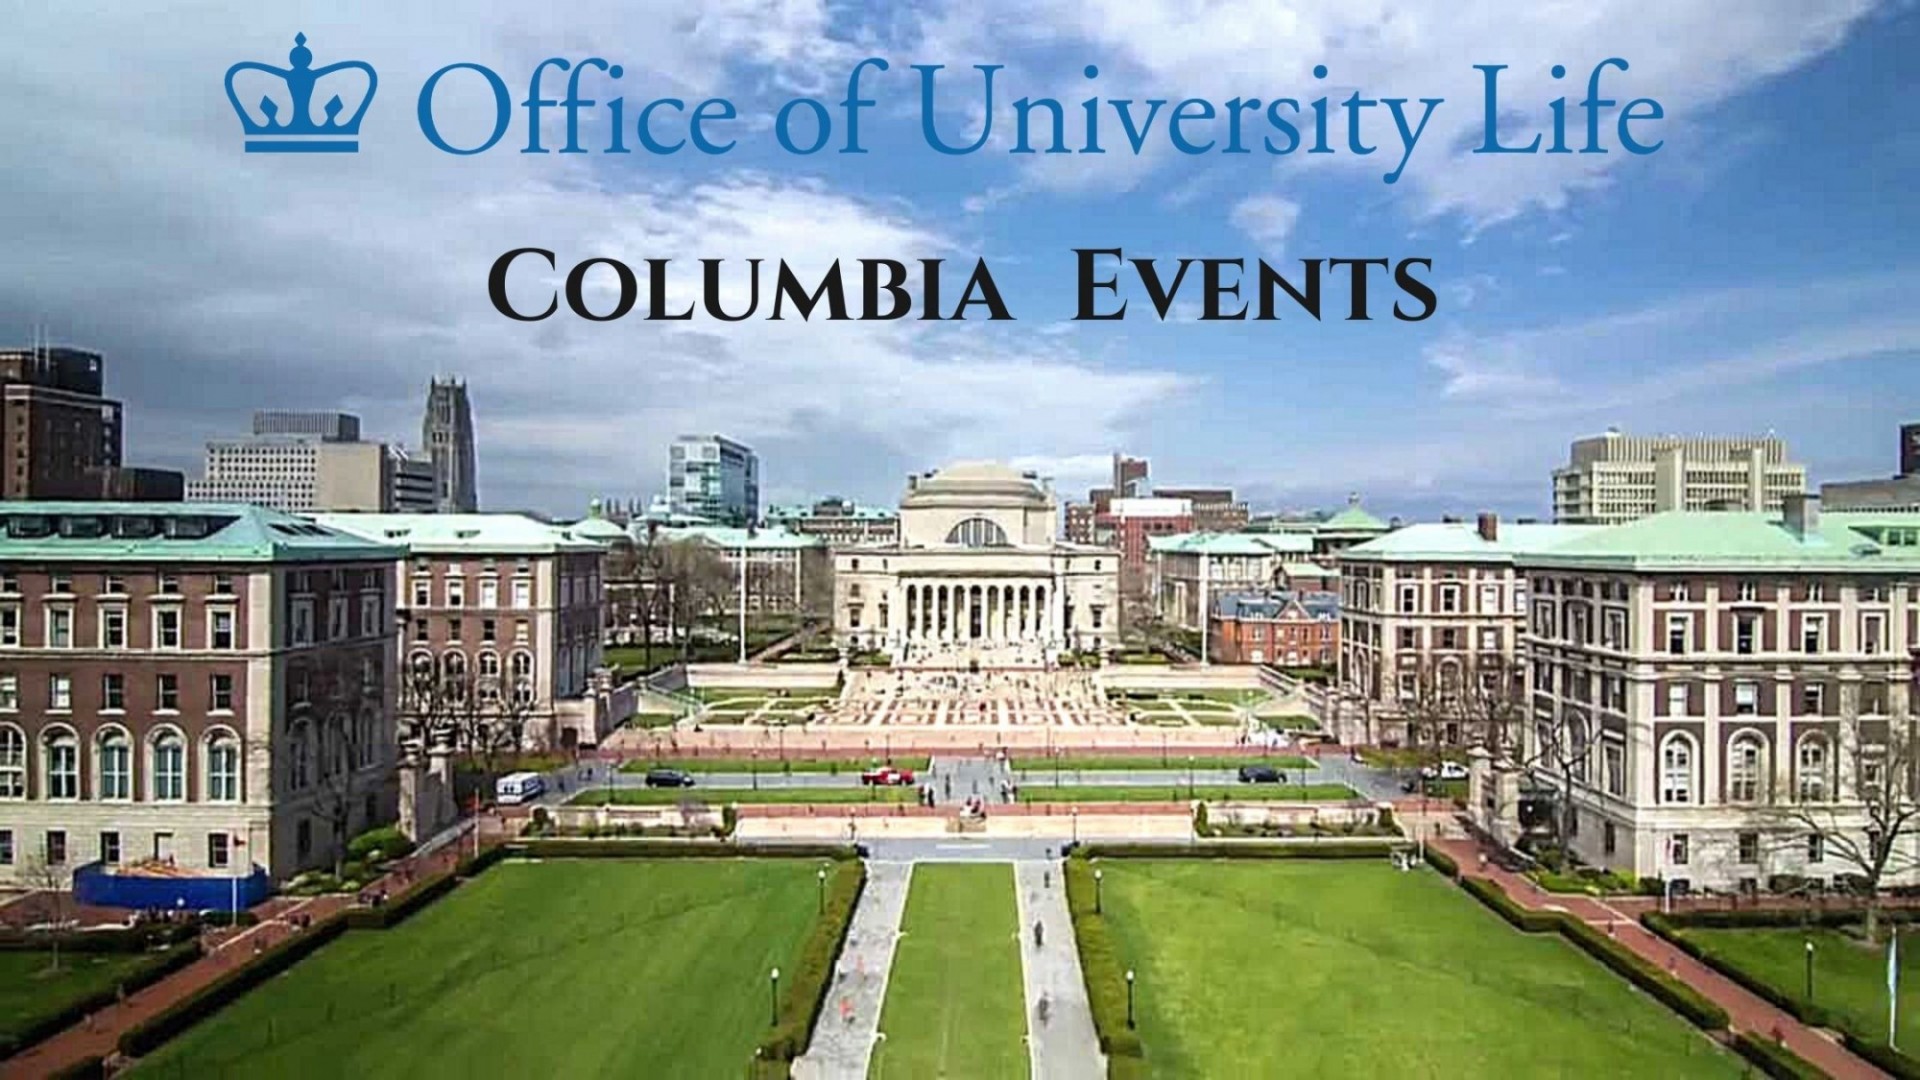 Columbia-Wide Events Flyer With Image of Campus